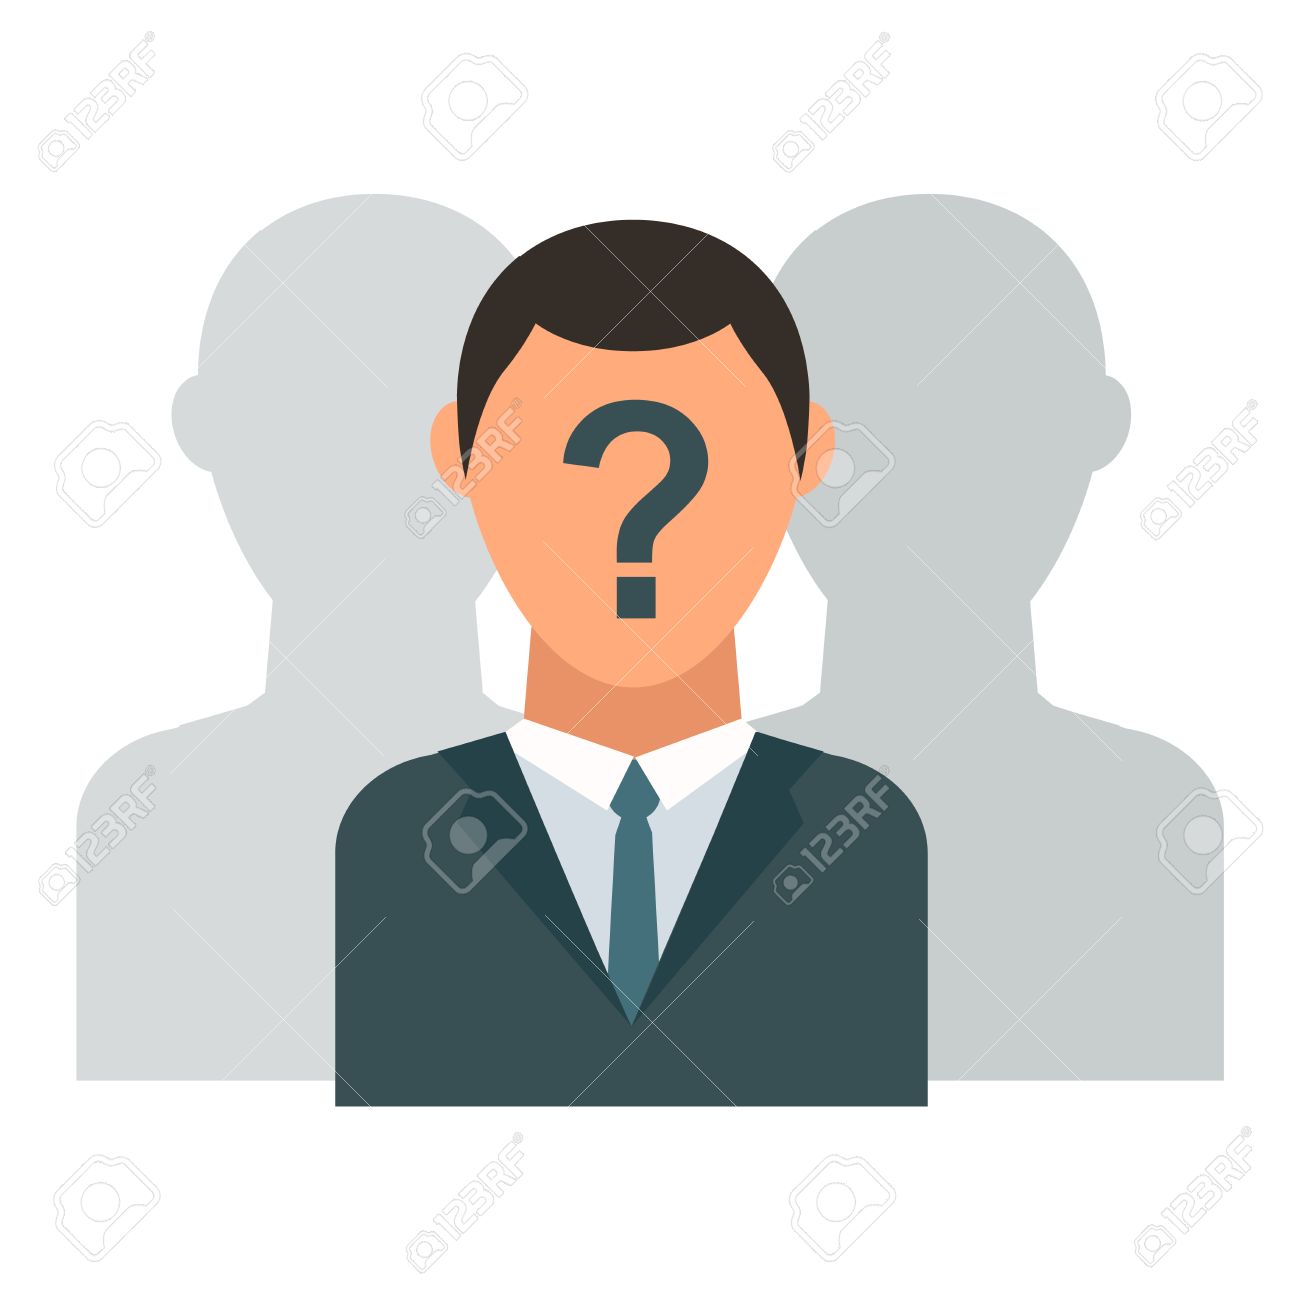 Unknown Person Vector Icon  Stock Vector  ahasoft #165828612